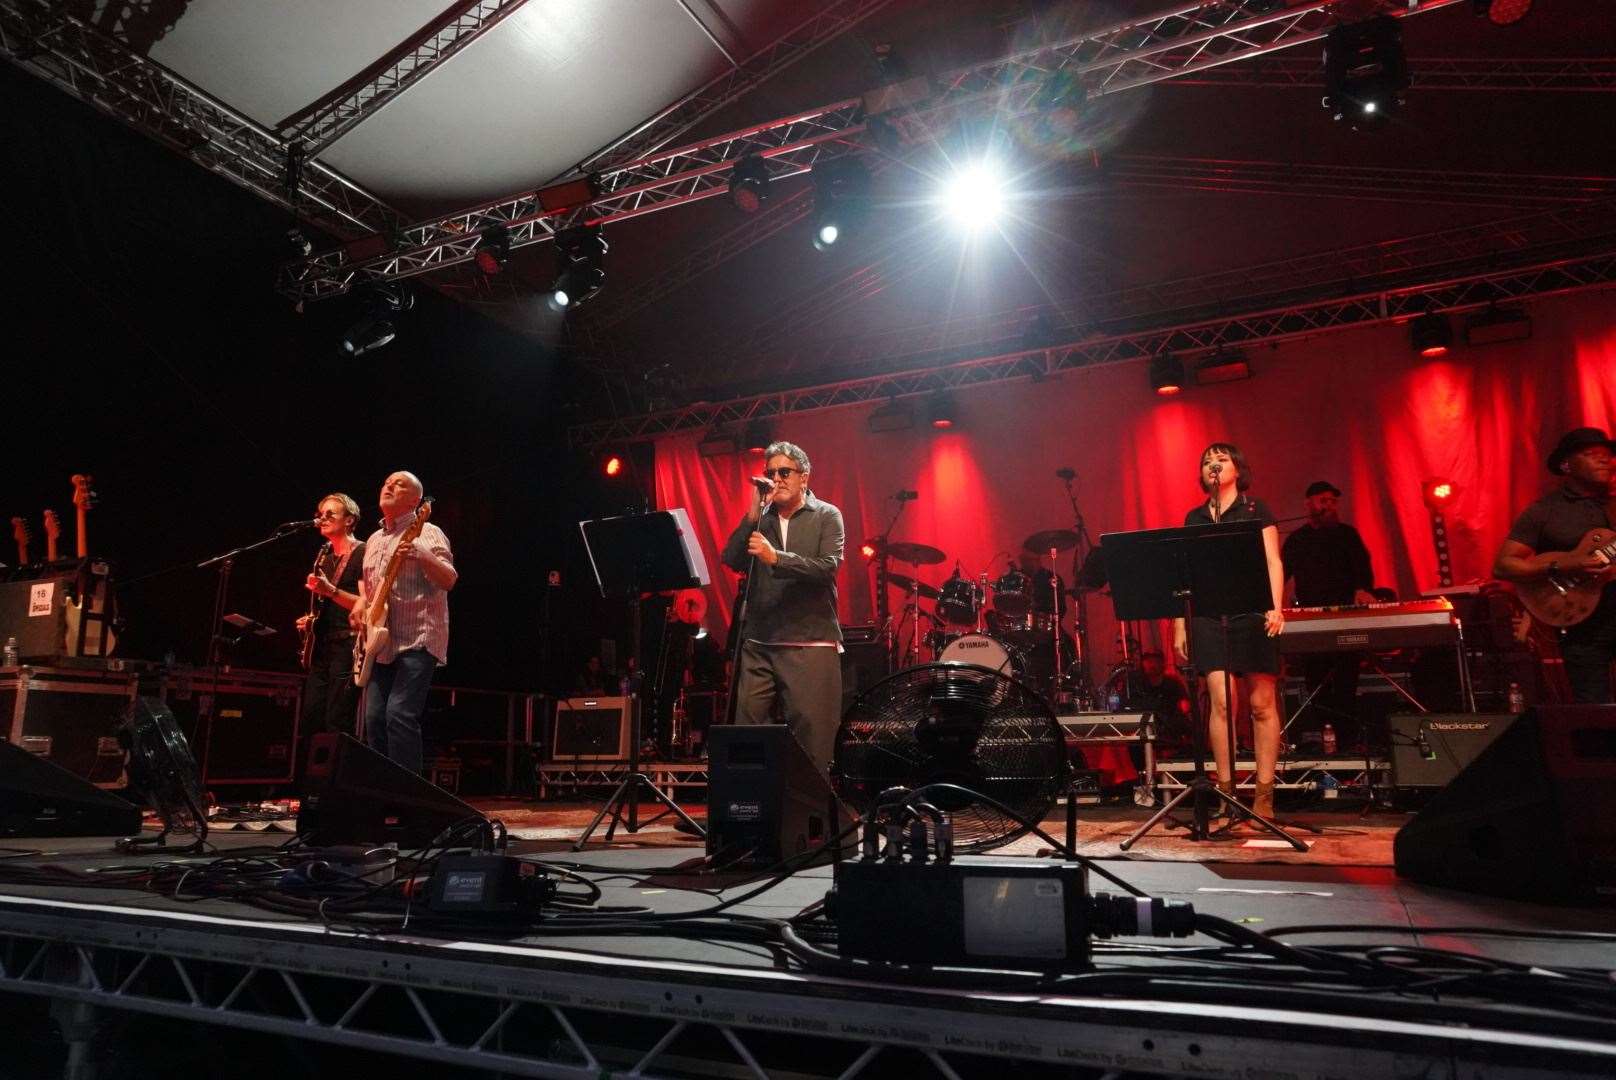 The Specials are the final act to perform at this year's Rochester Castle Concerts. Picture: Pete Willson